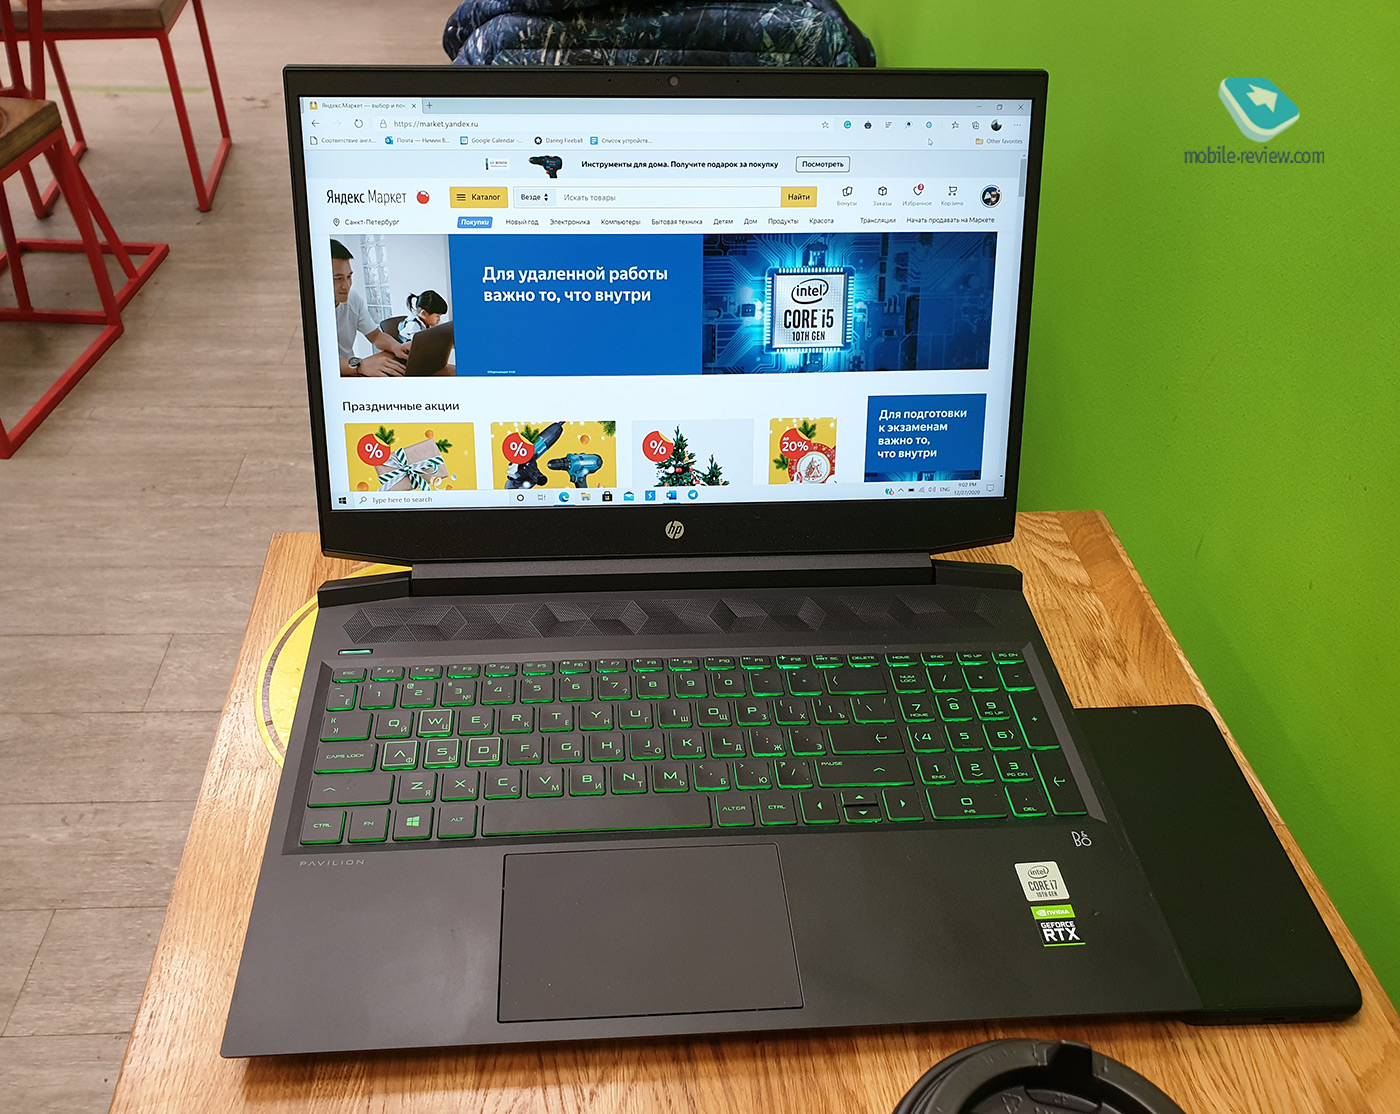 Affordable HP Pavilion Gaming 16 review: Cyberpunk 2077 at 60 fps